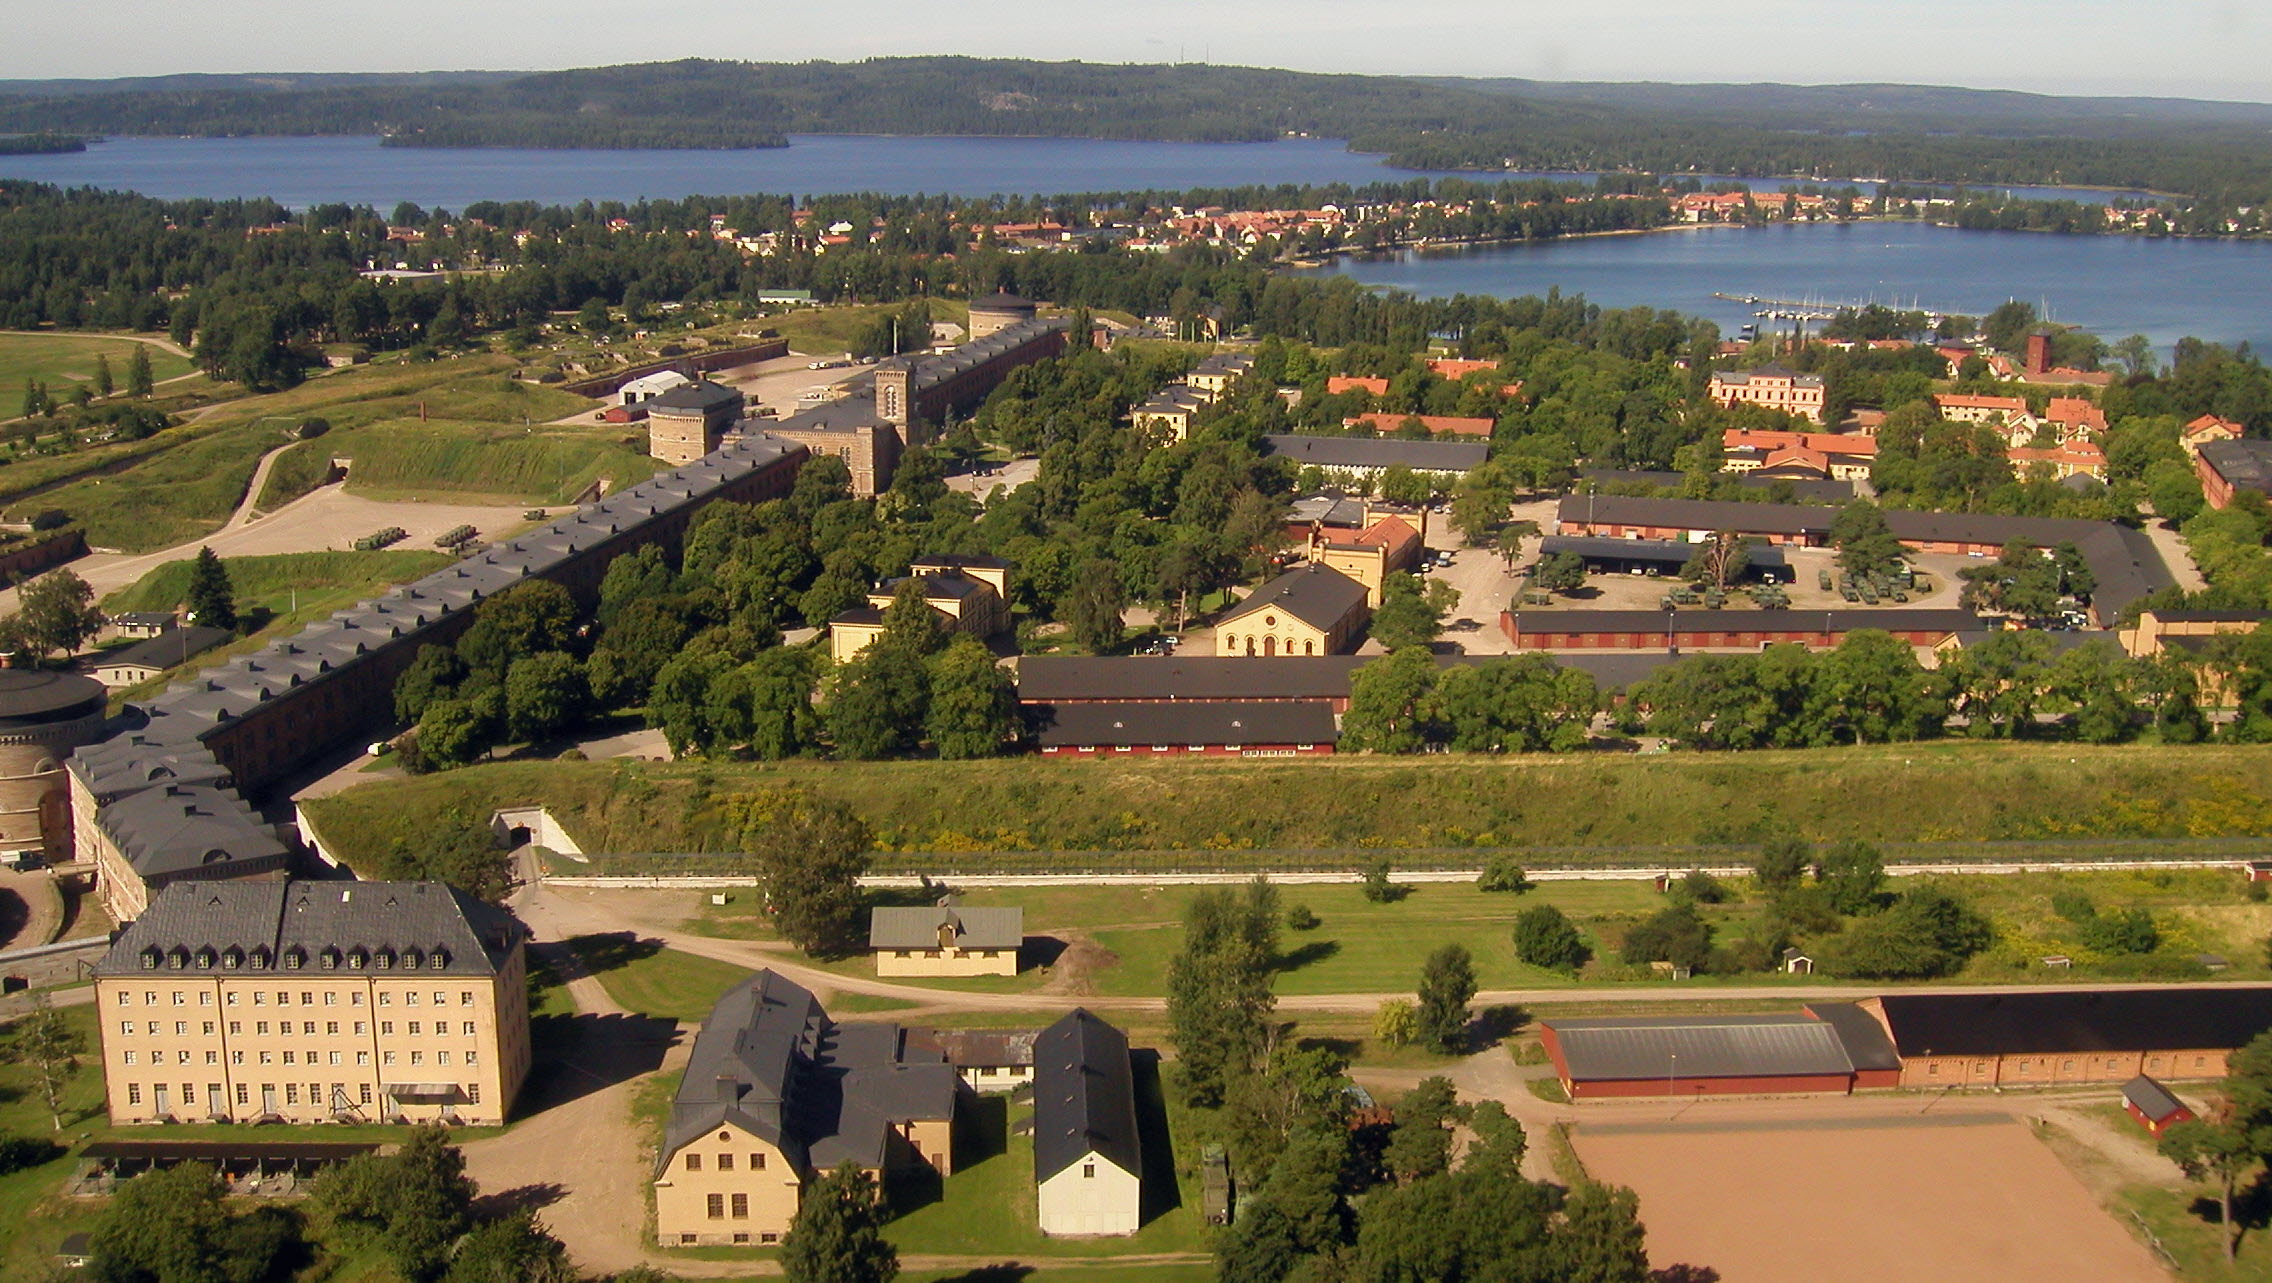 The Fortress of Karlsborg